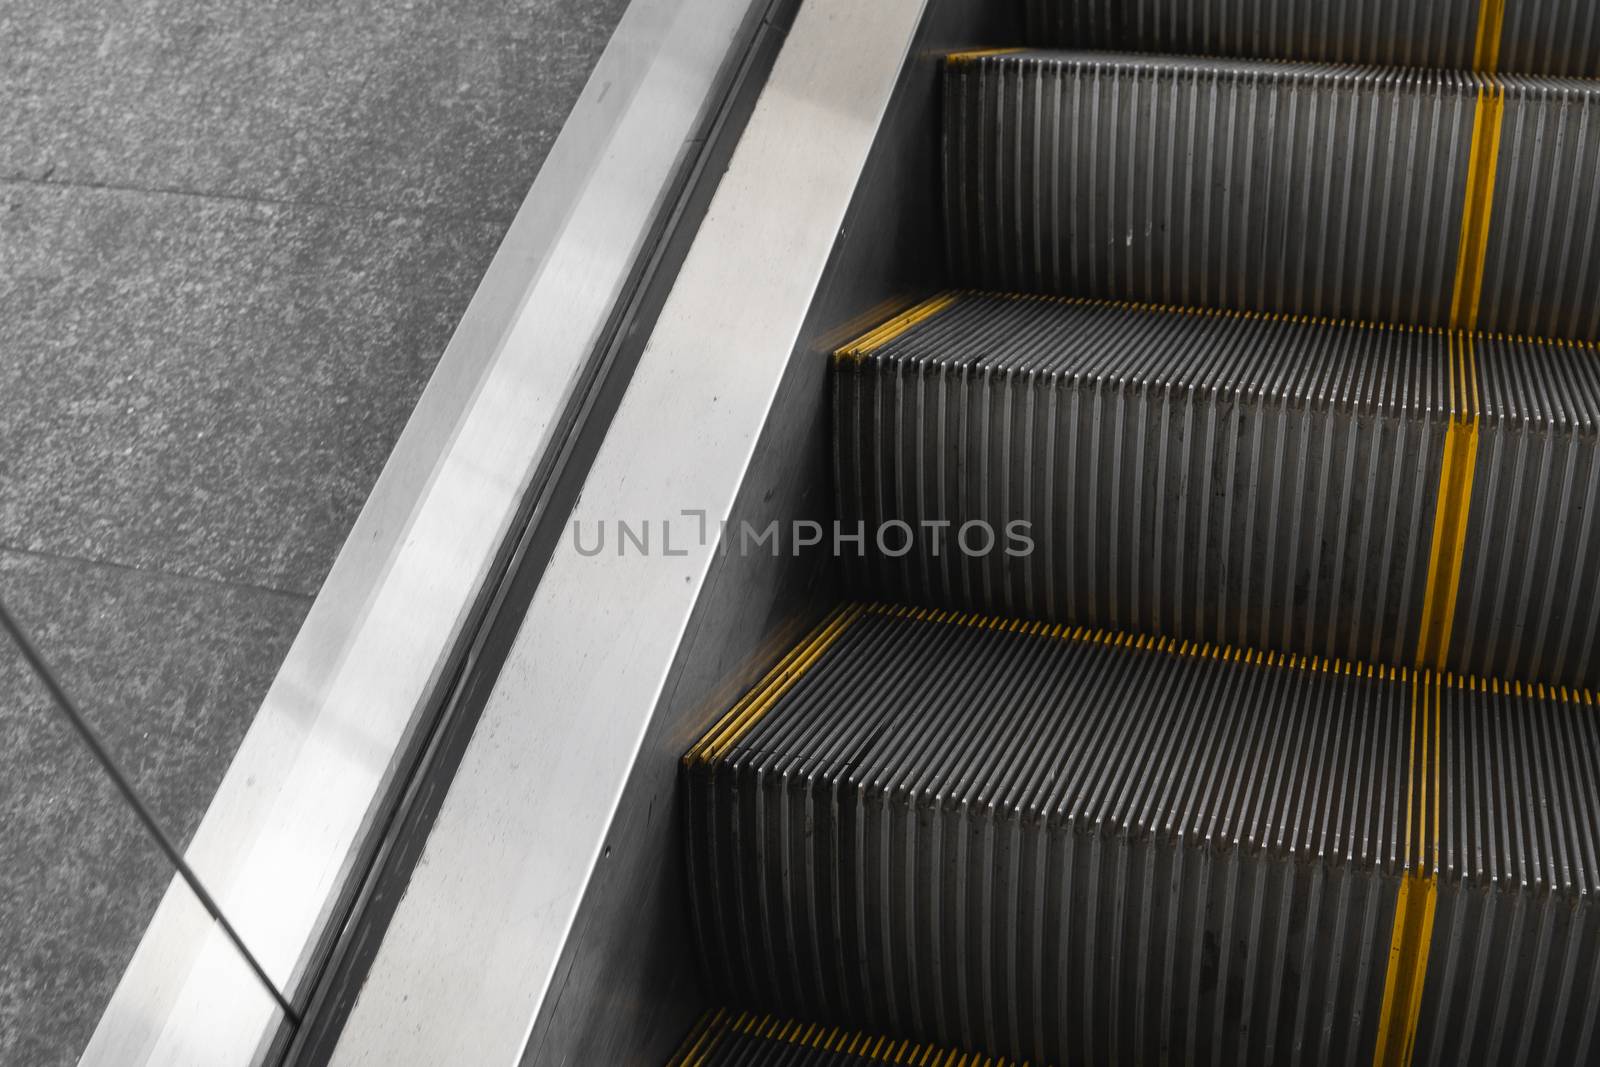 Ditry stairs on Escalator with yellow strips